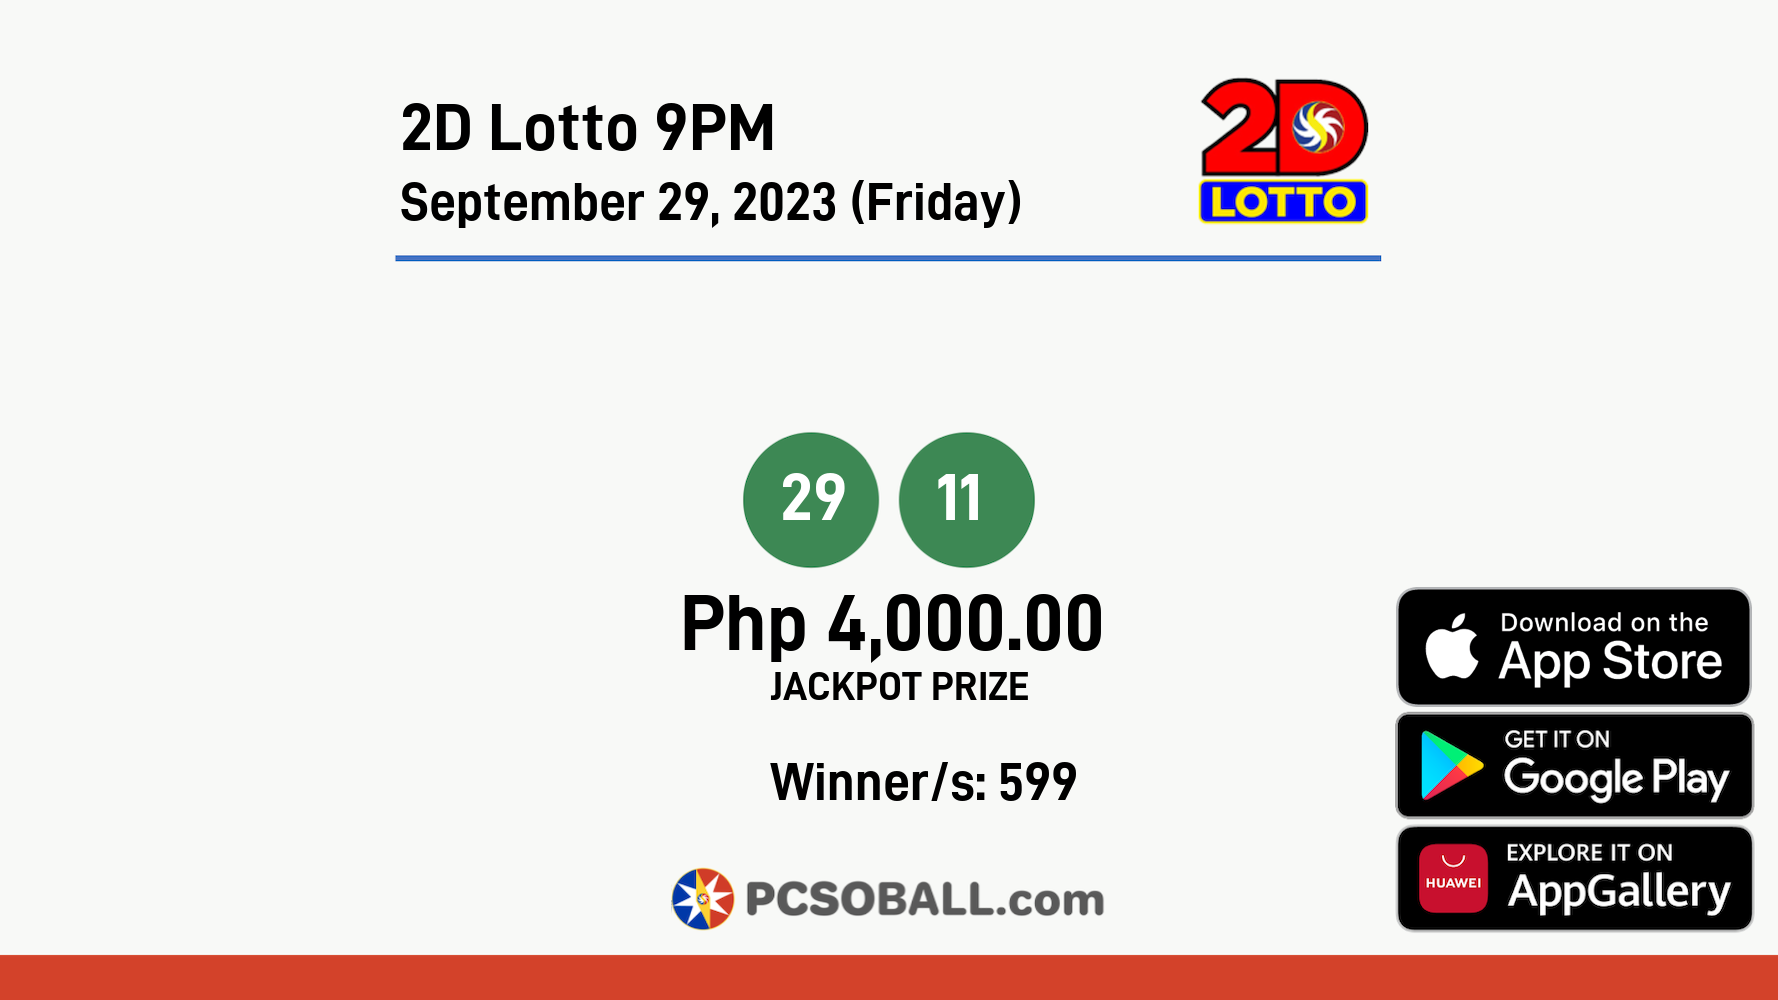 2D Lotto 9PM September 29, 2023 (Friday) Result